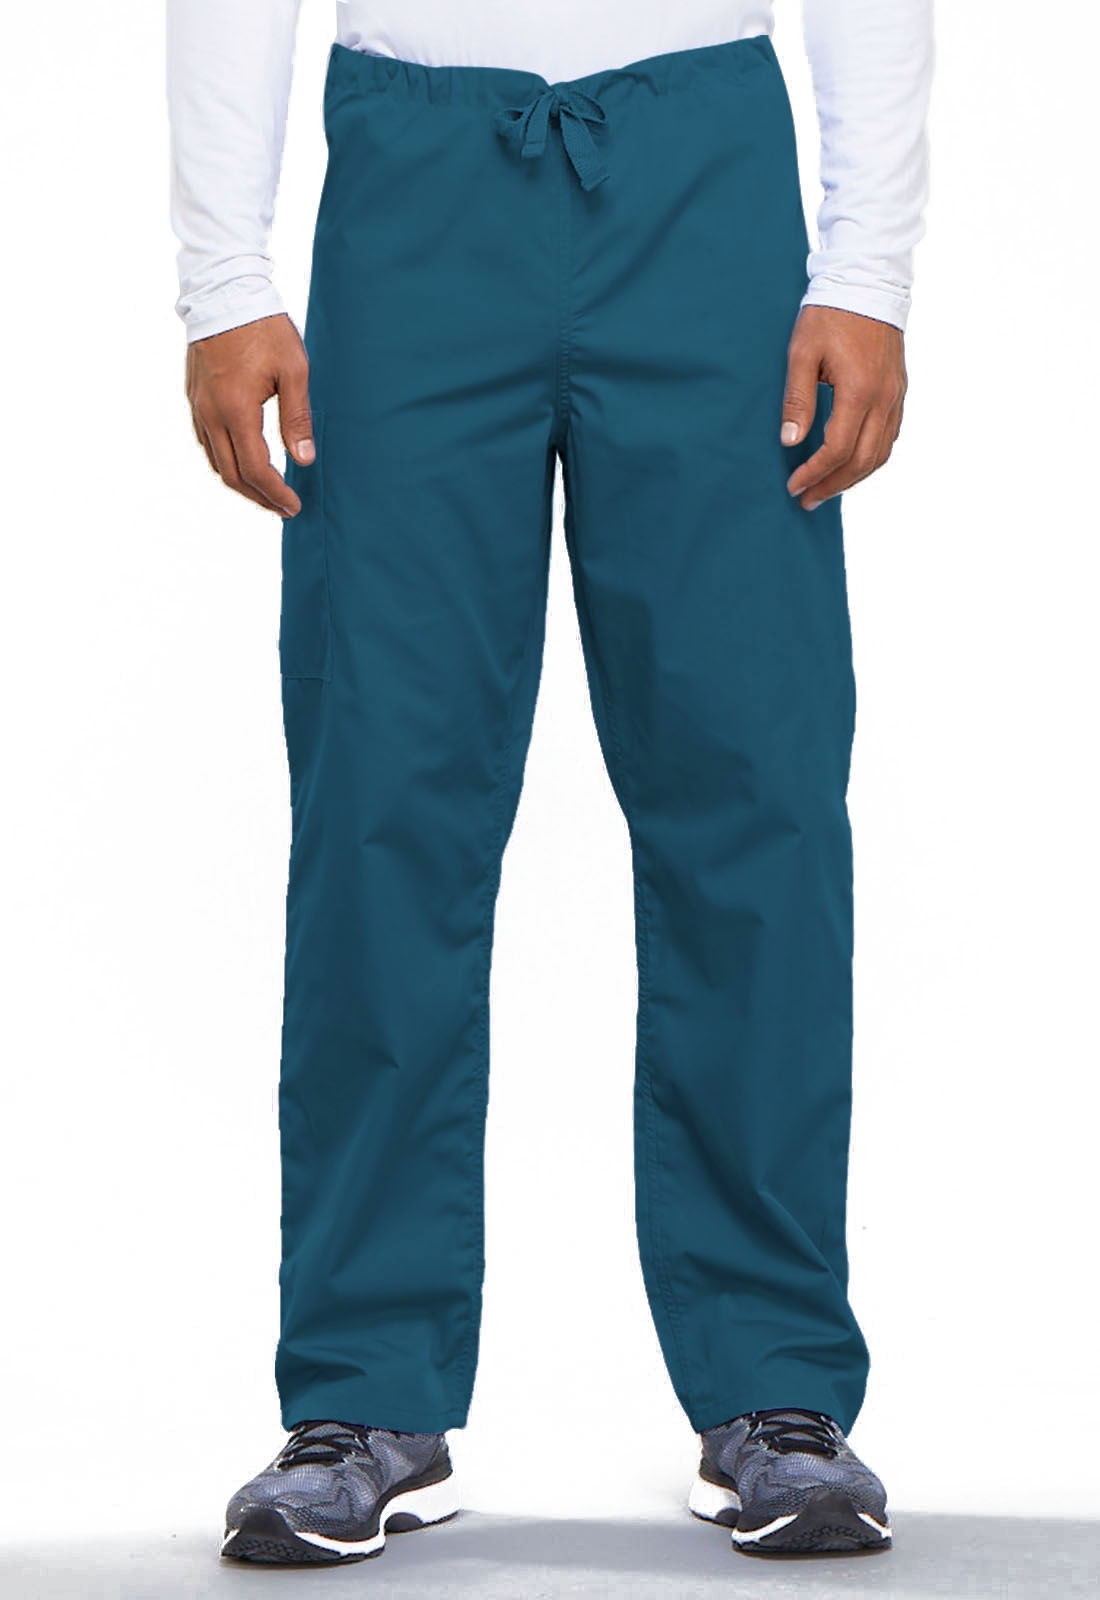 Stylish and Comfortable Grey's Anatomy Scrubs from Medical Scrubs  Collection #SpringintoSummerFun - Mom Does Reviews